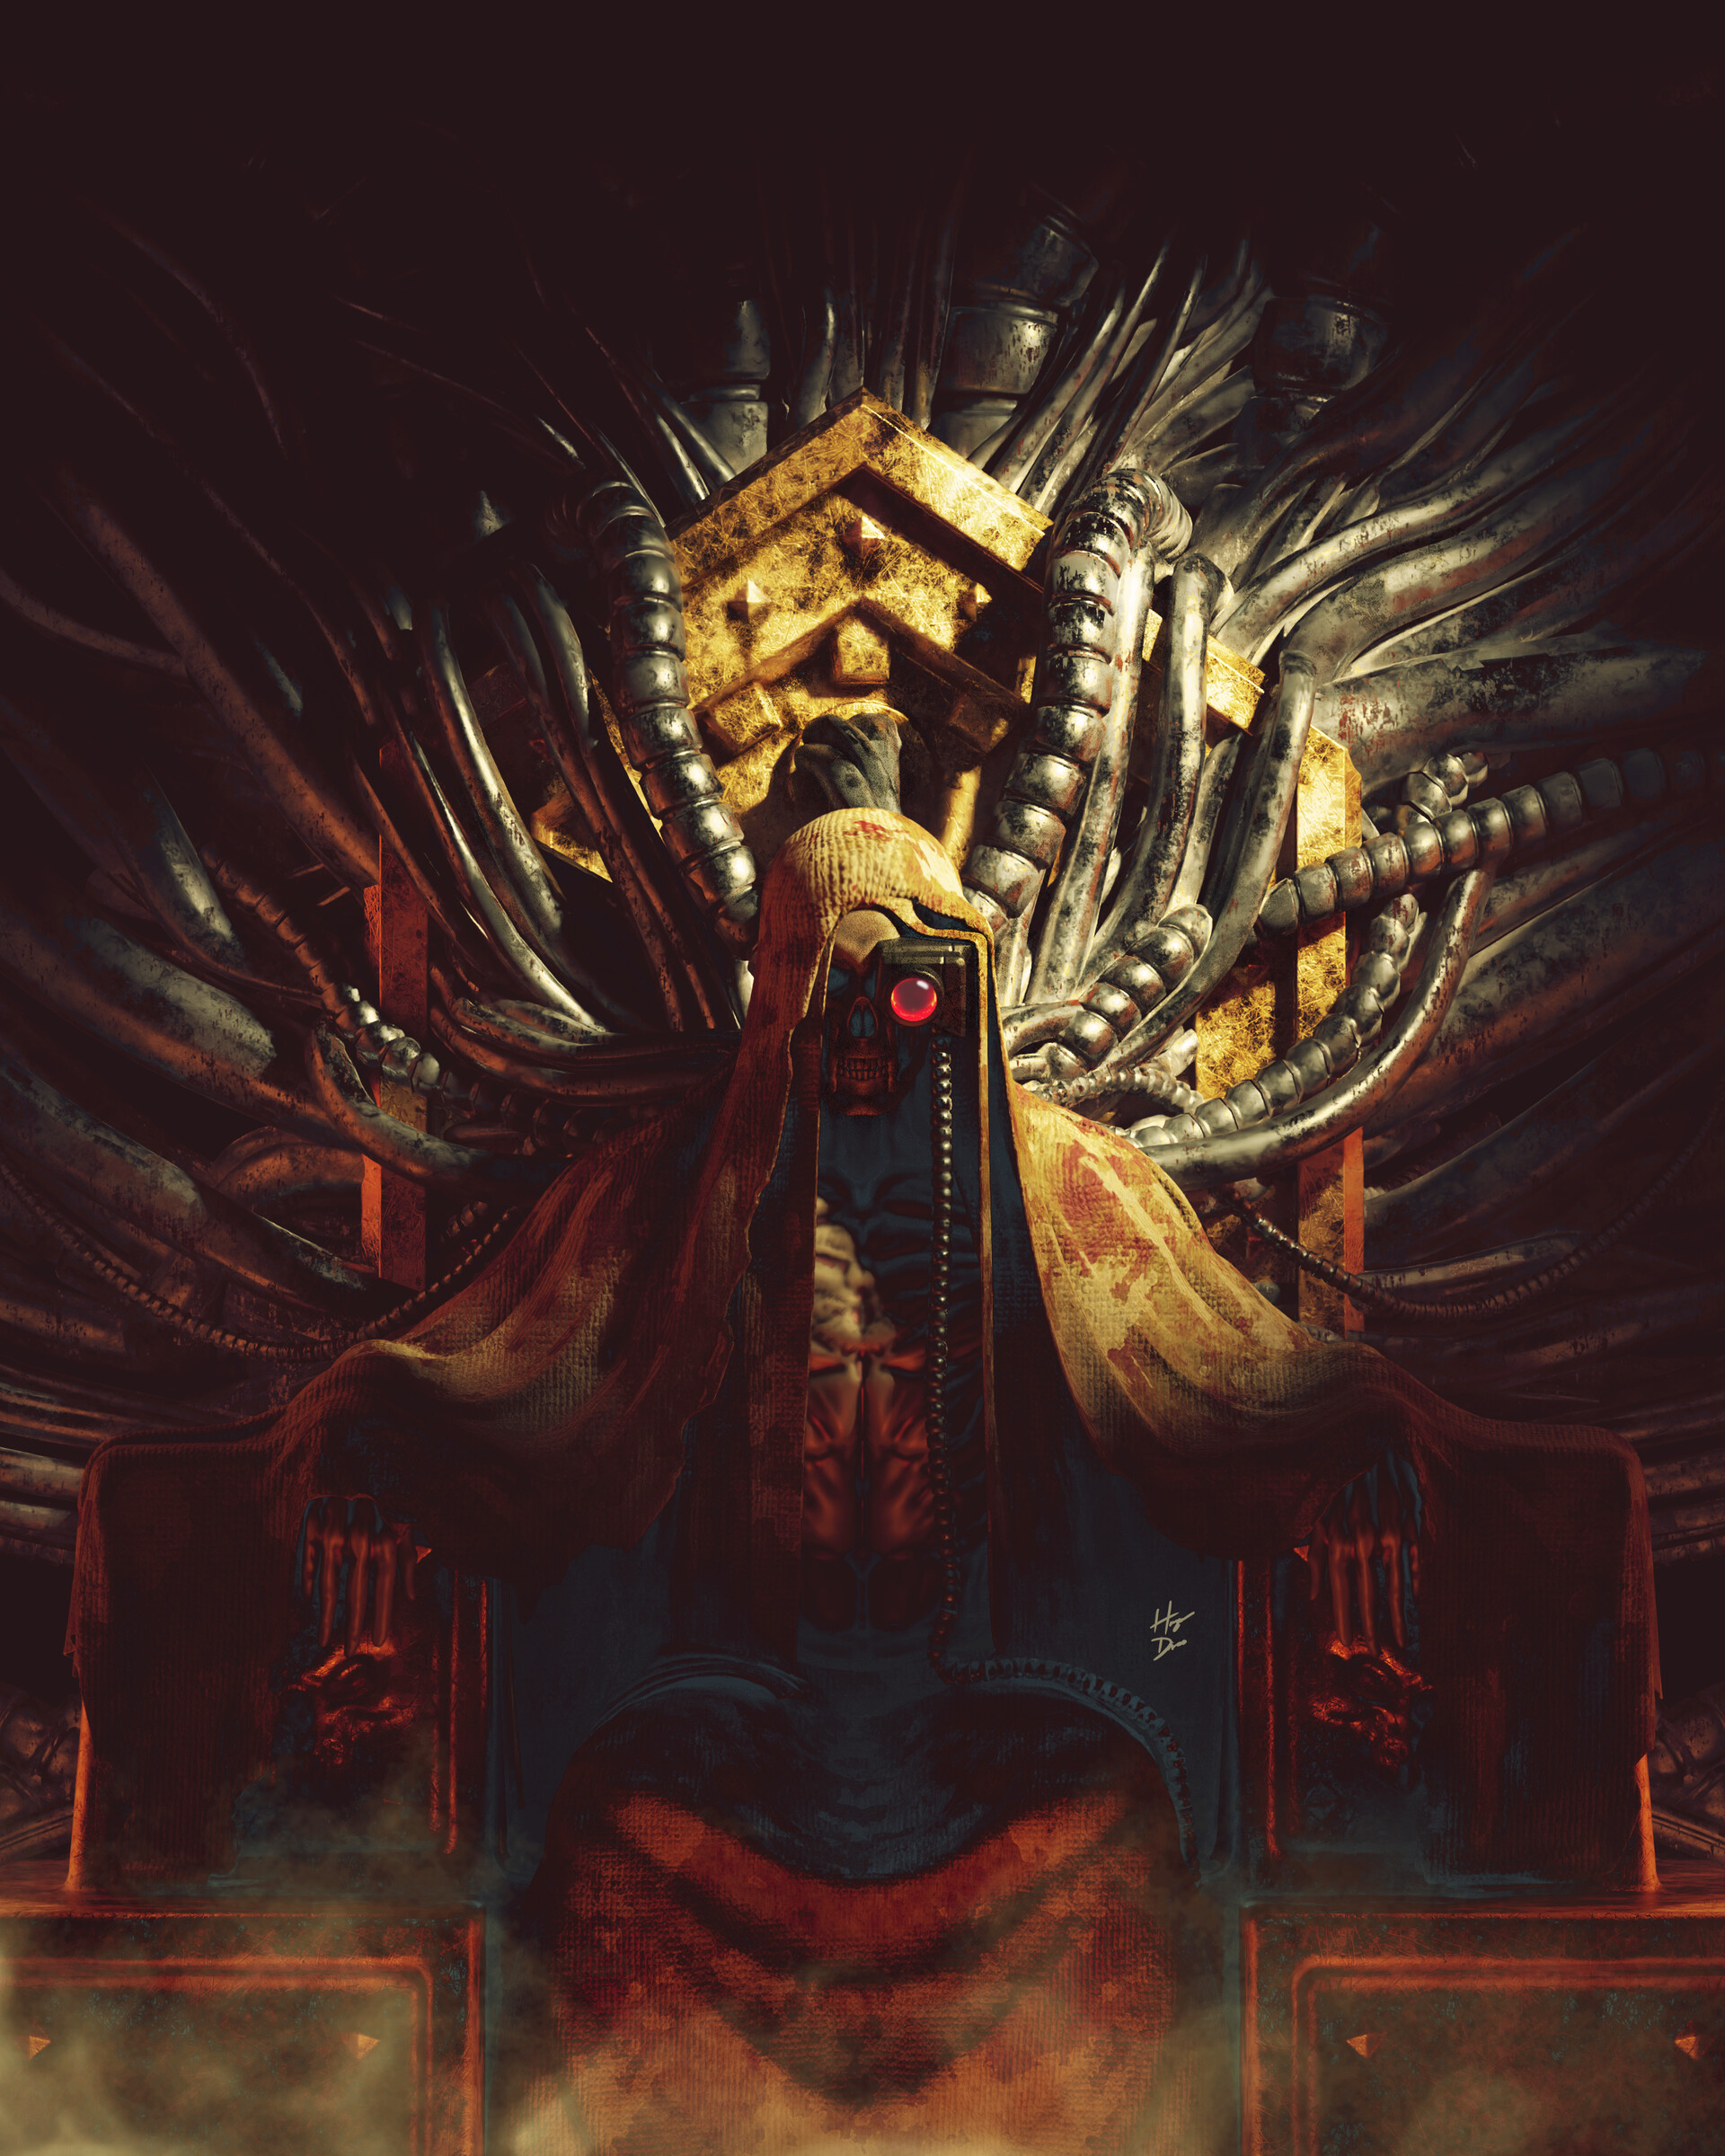 General 1920x2400 Warhammer 40,000 science fiction high tech Emperor of Mankind wires Augmentation cowl skeleton golden throne gold red throne dust video games video game art video game characters